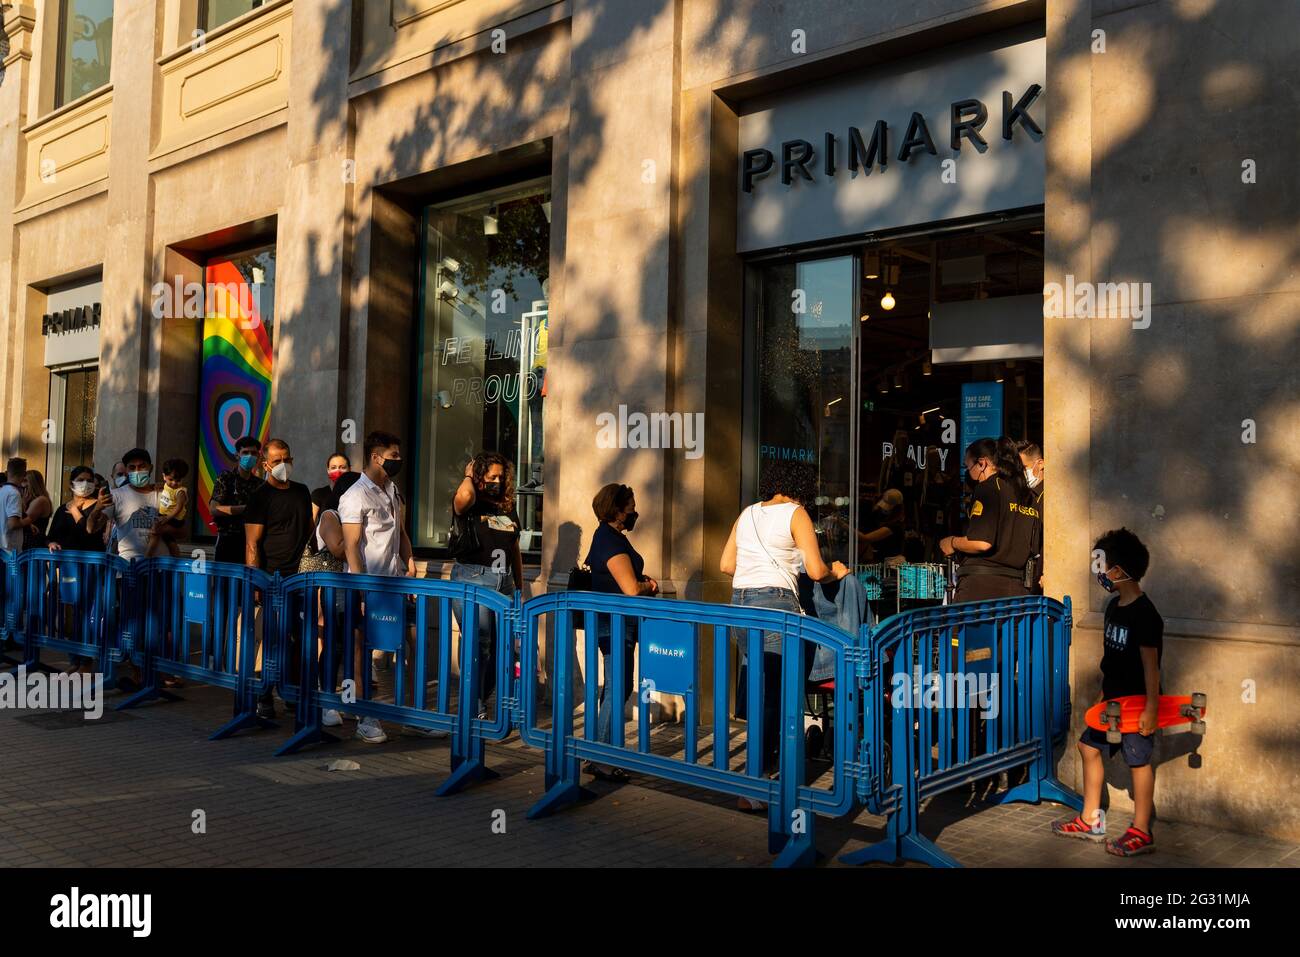 Barcelona Spain 12th June 21 People Are Seen Queuing Before Entering A Primark Clothing Store In Catalunya Square In Barcelona Spain On June 12 21 The Beginning Of Summer And The Easing